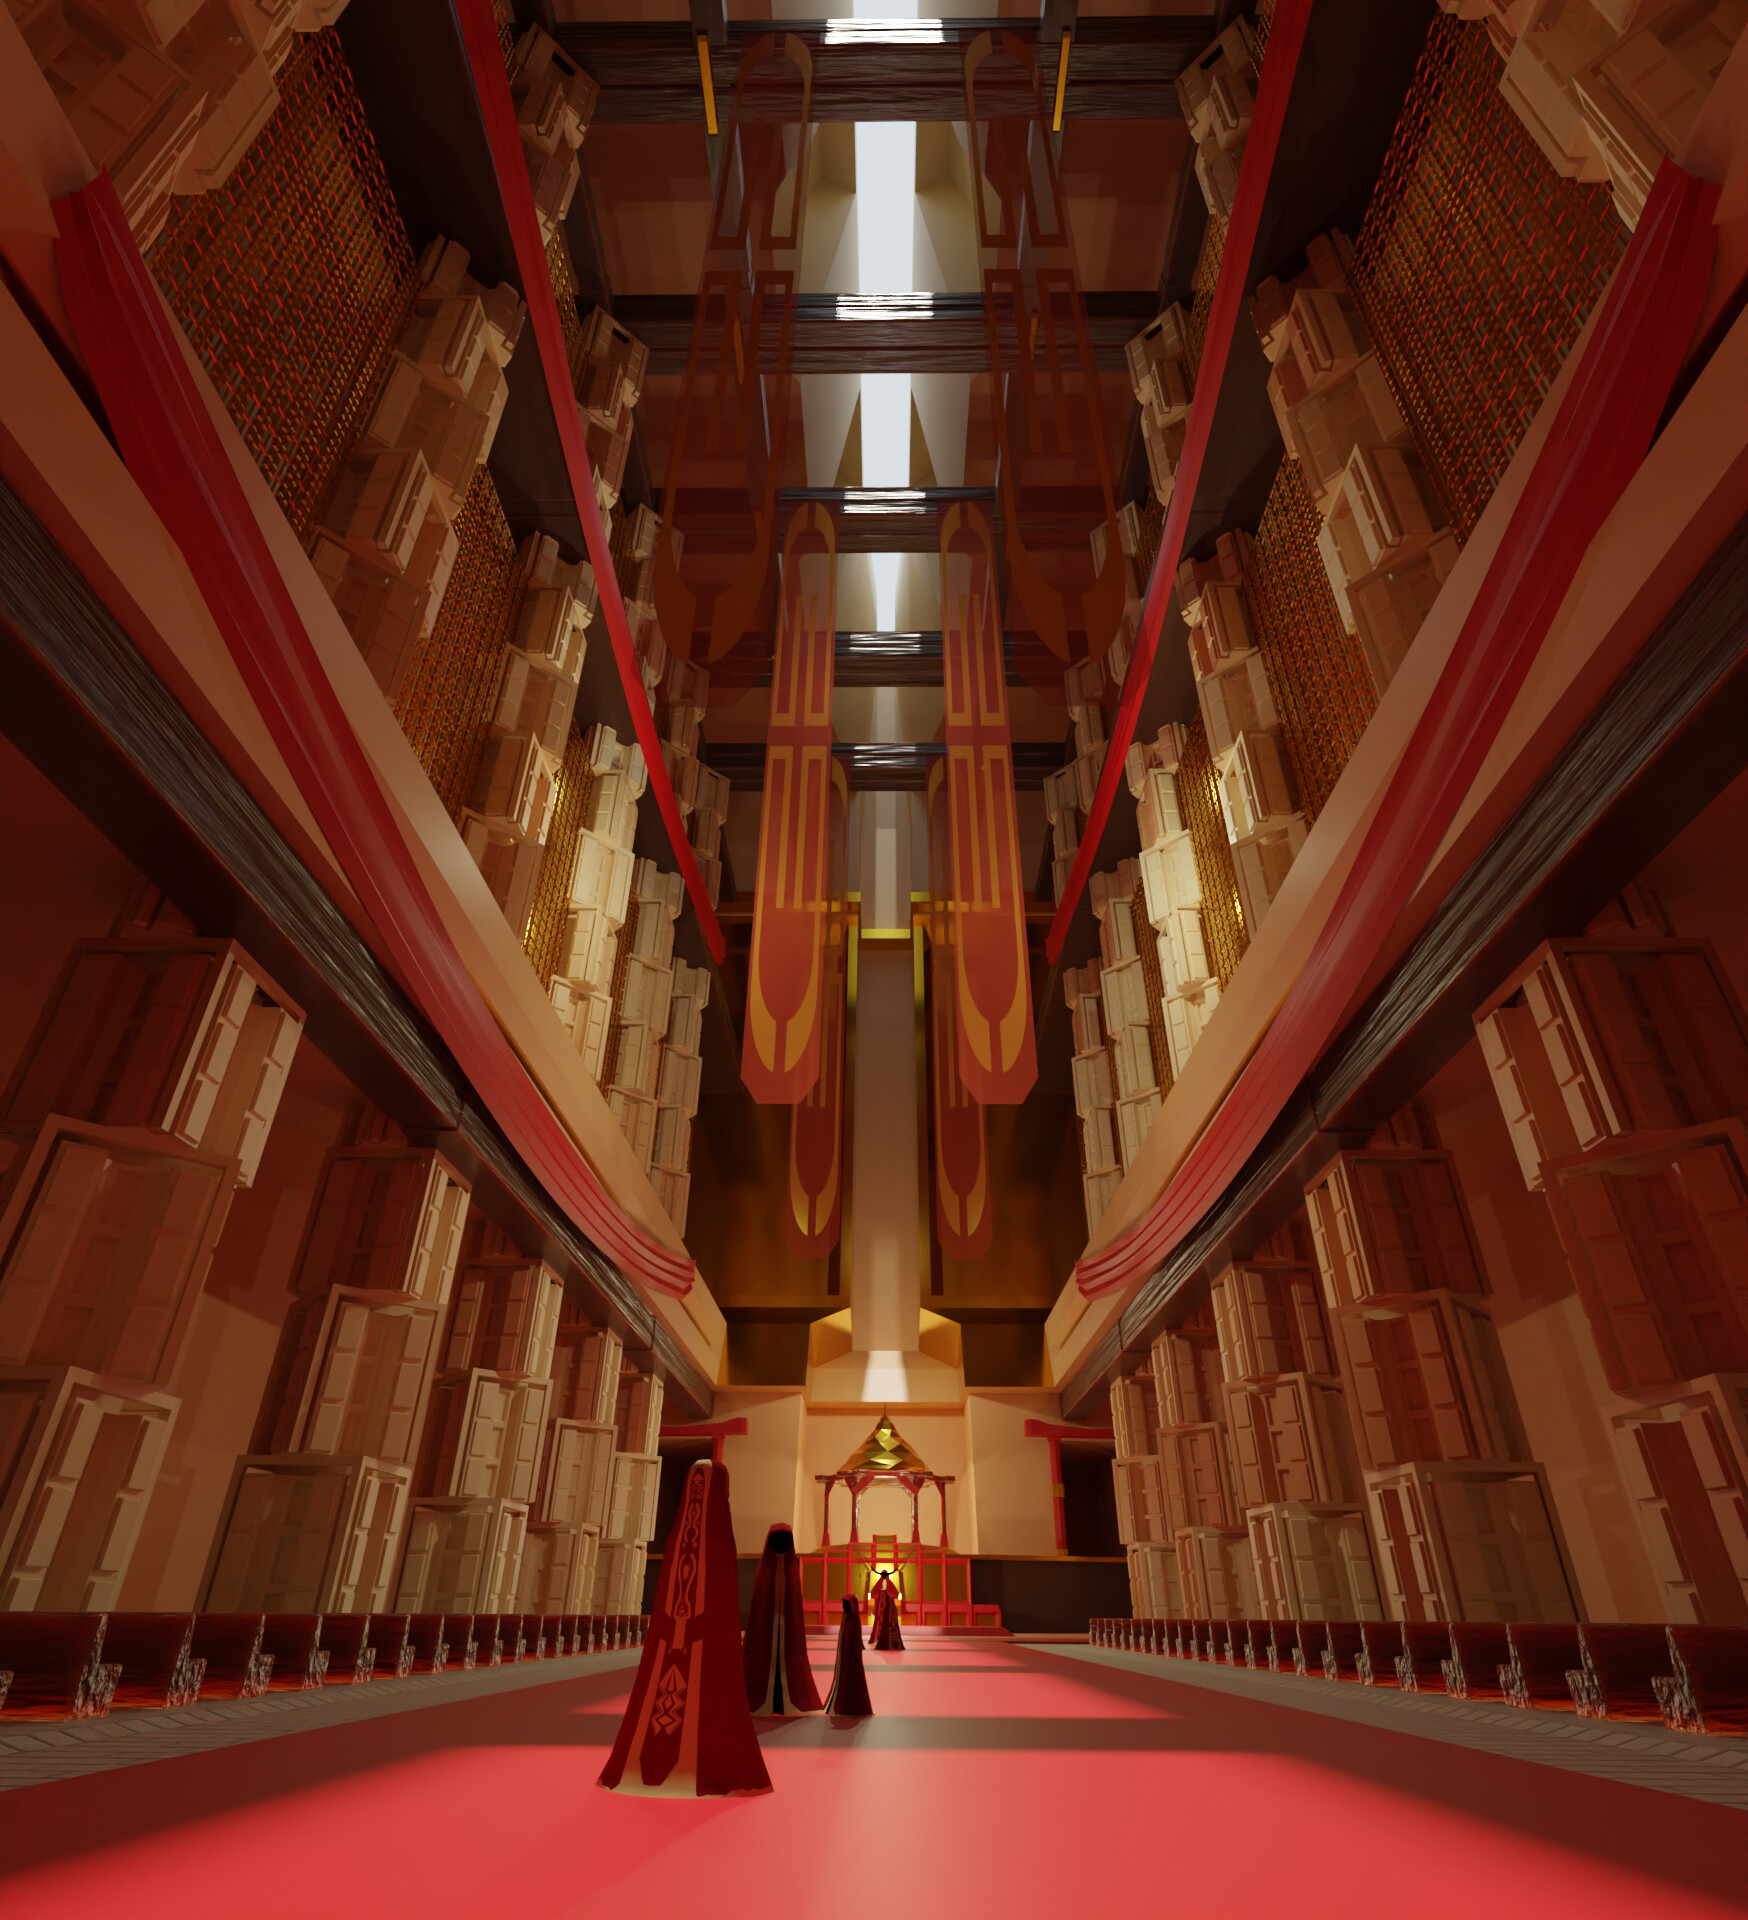 The red citadel